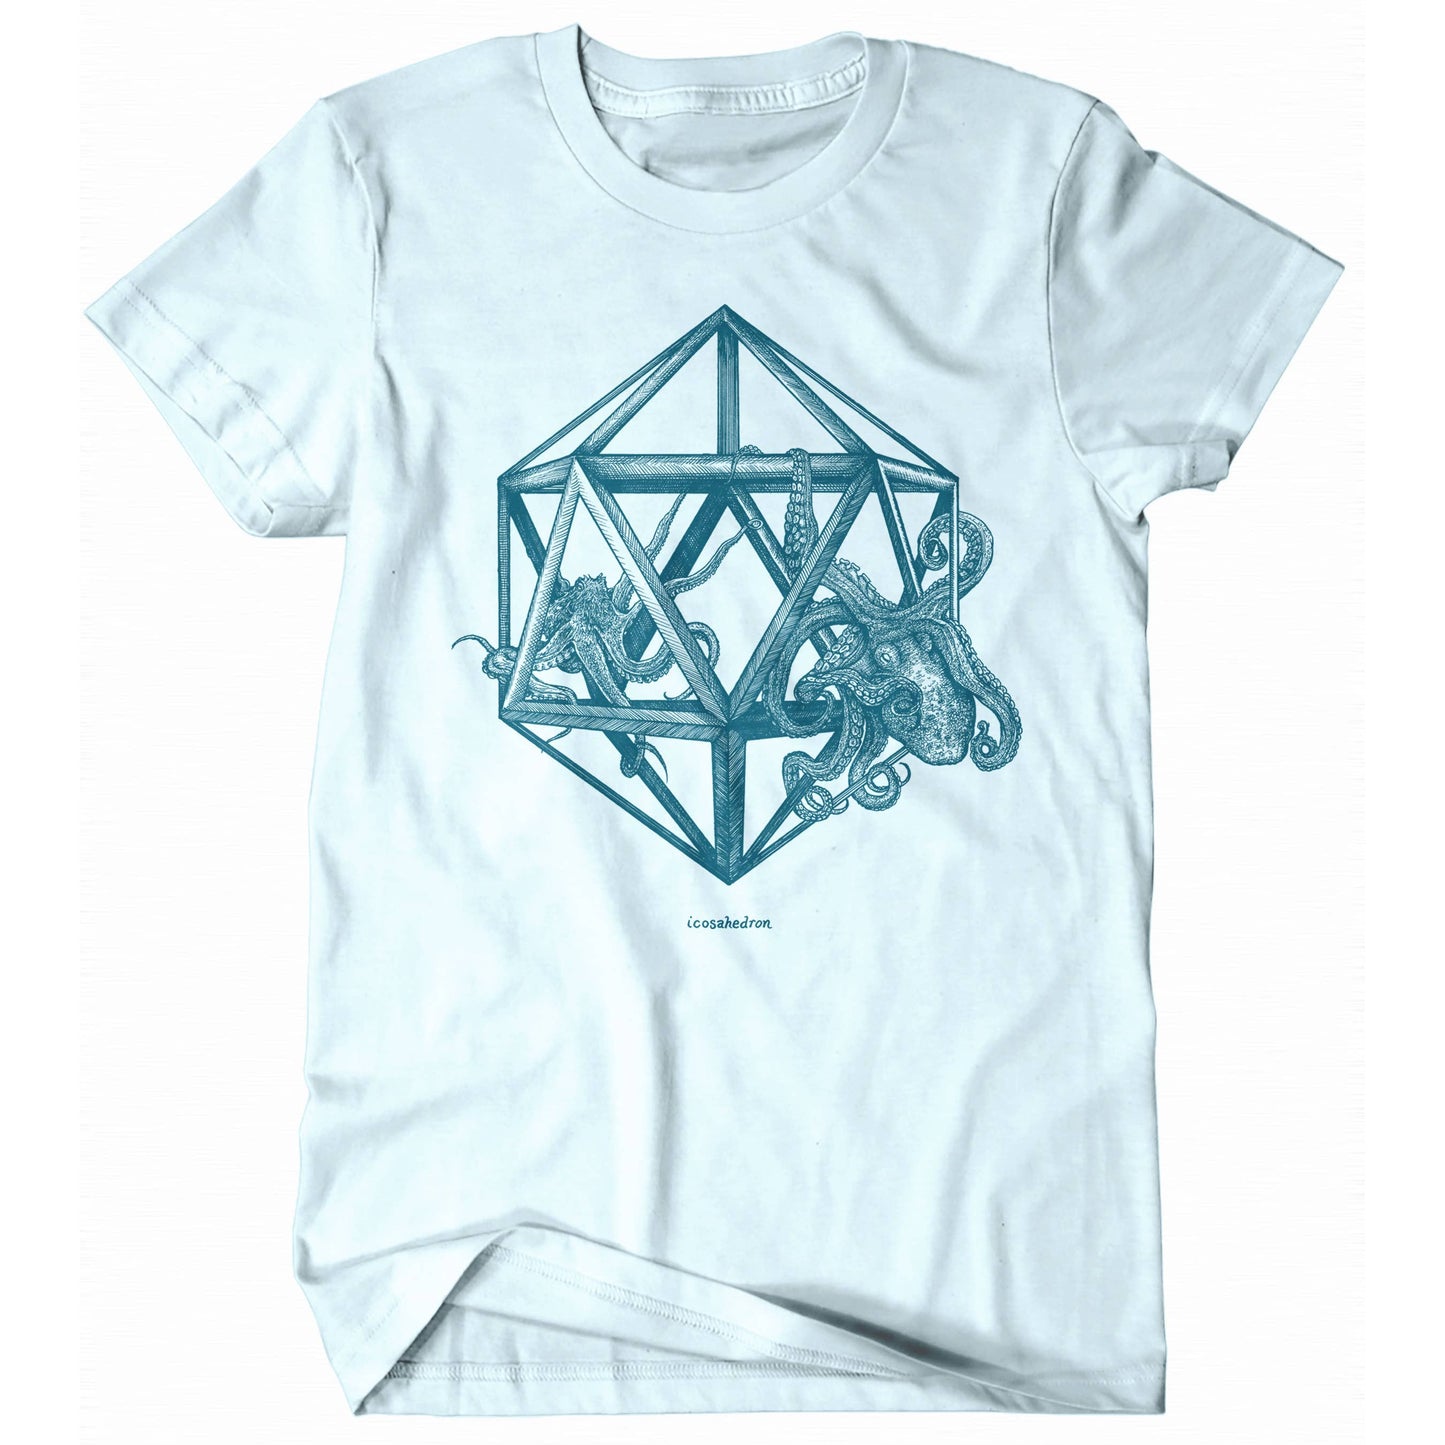 Icosahedron T-Shirt with Octopus